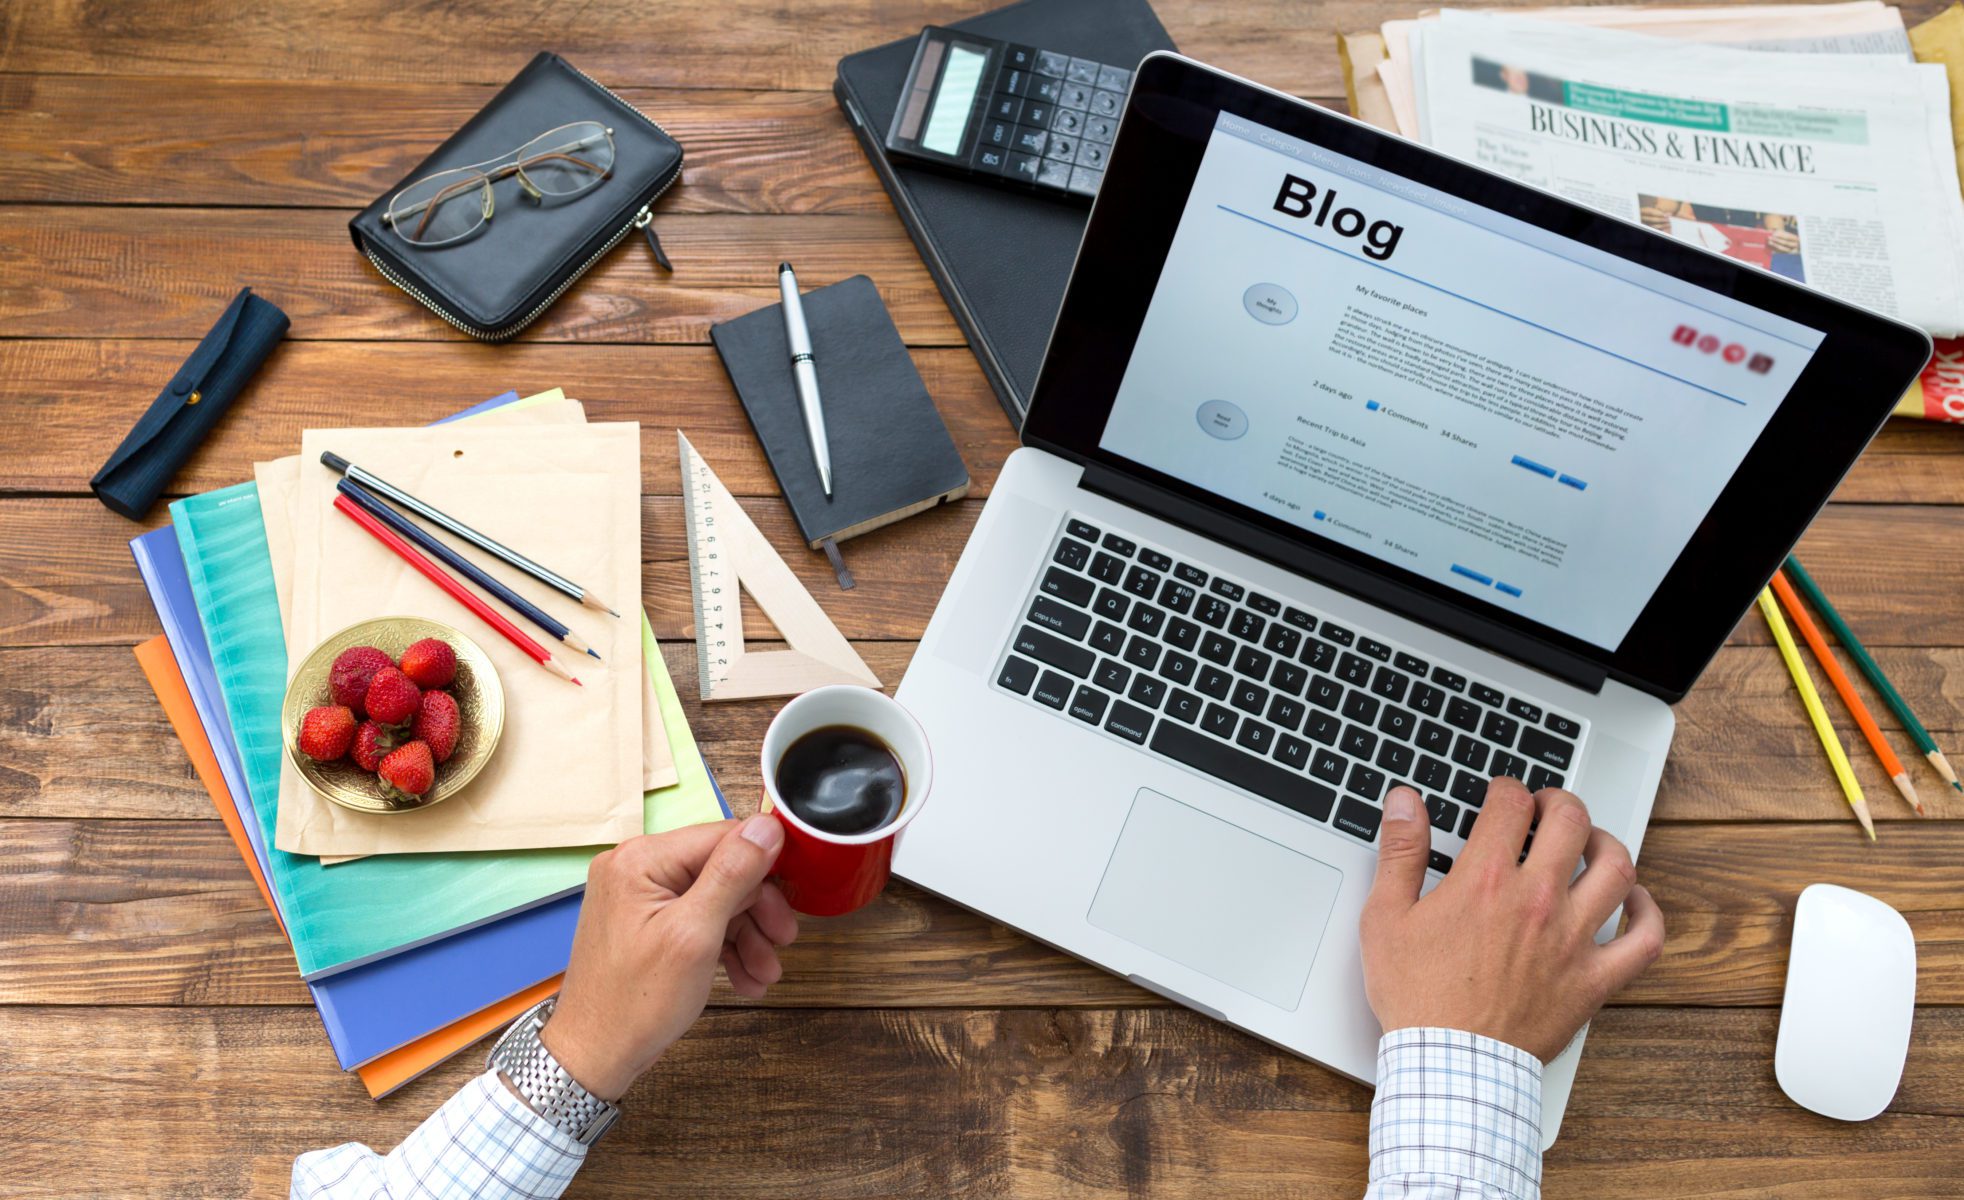 8 Different Blog Post Ideas for Your Business